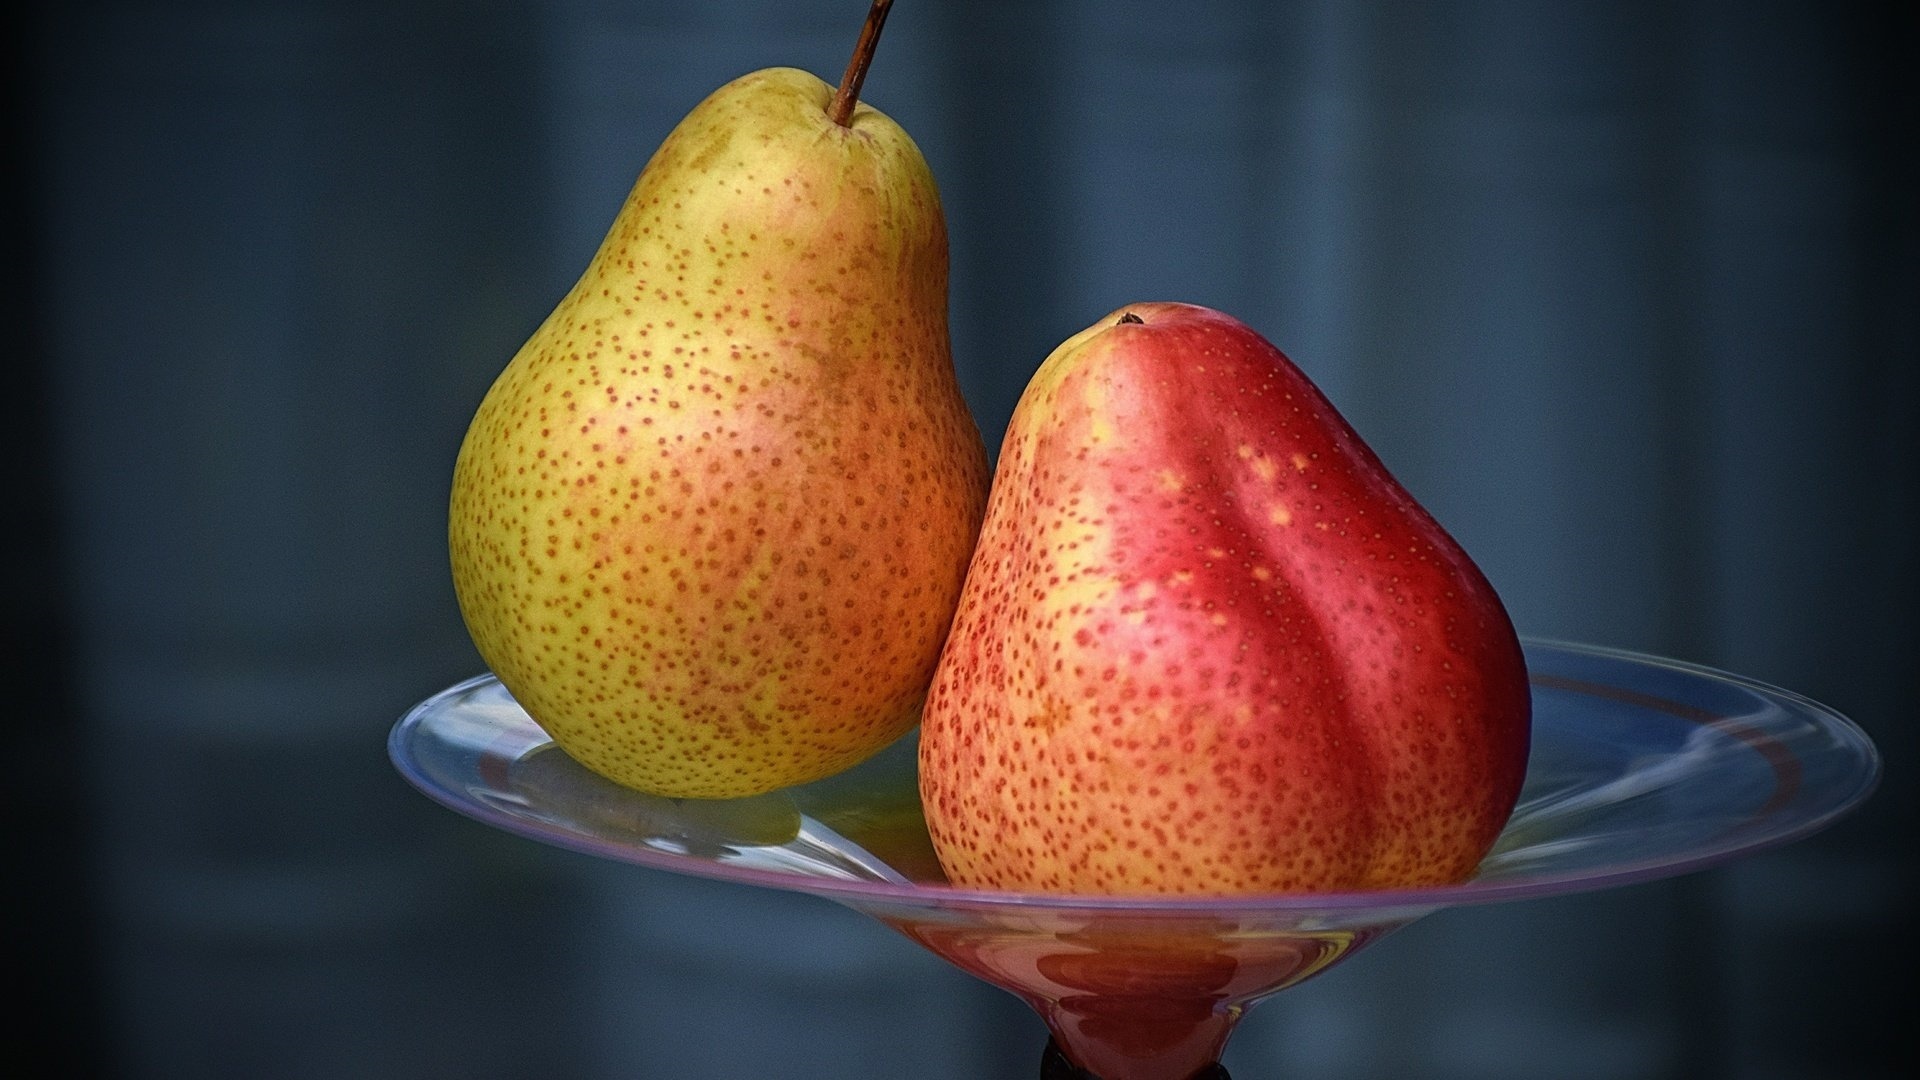 Pear wallpapers, High-definition, Background images, Fruity, 1920x1080 Full HD Desktop